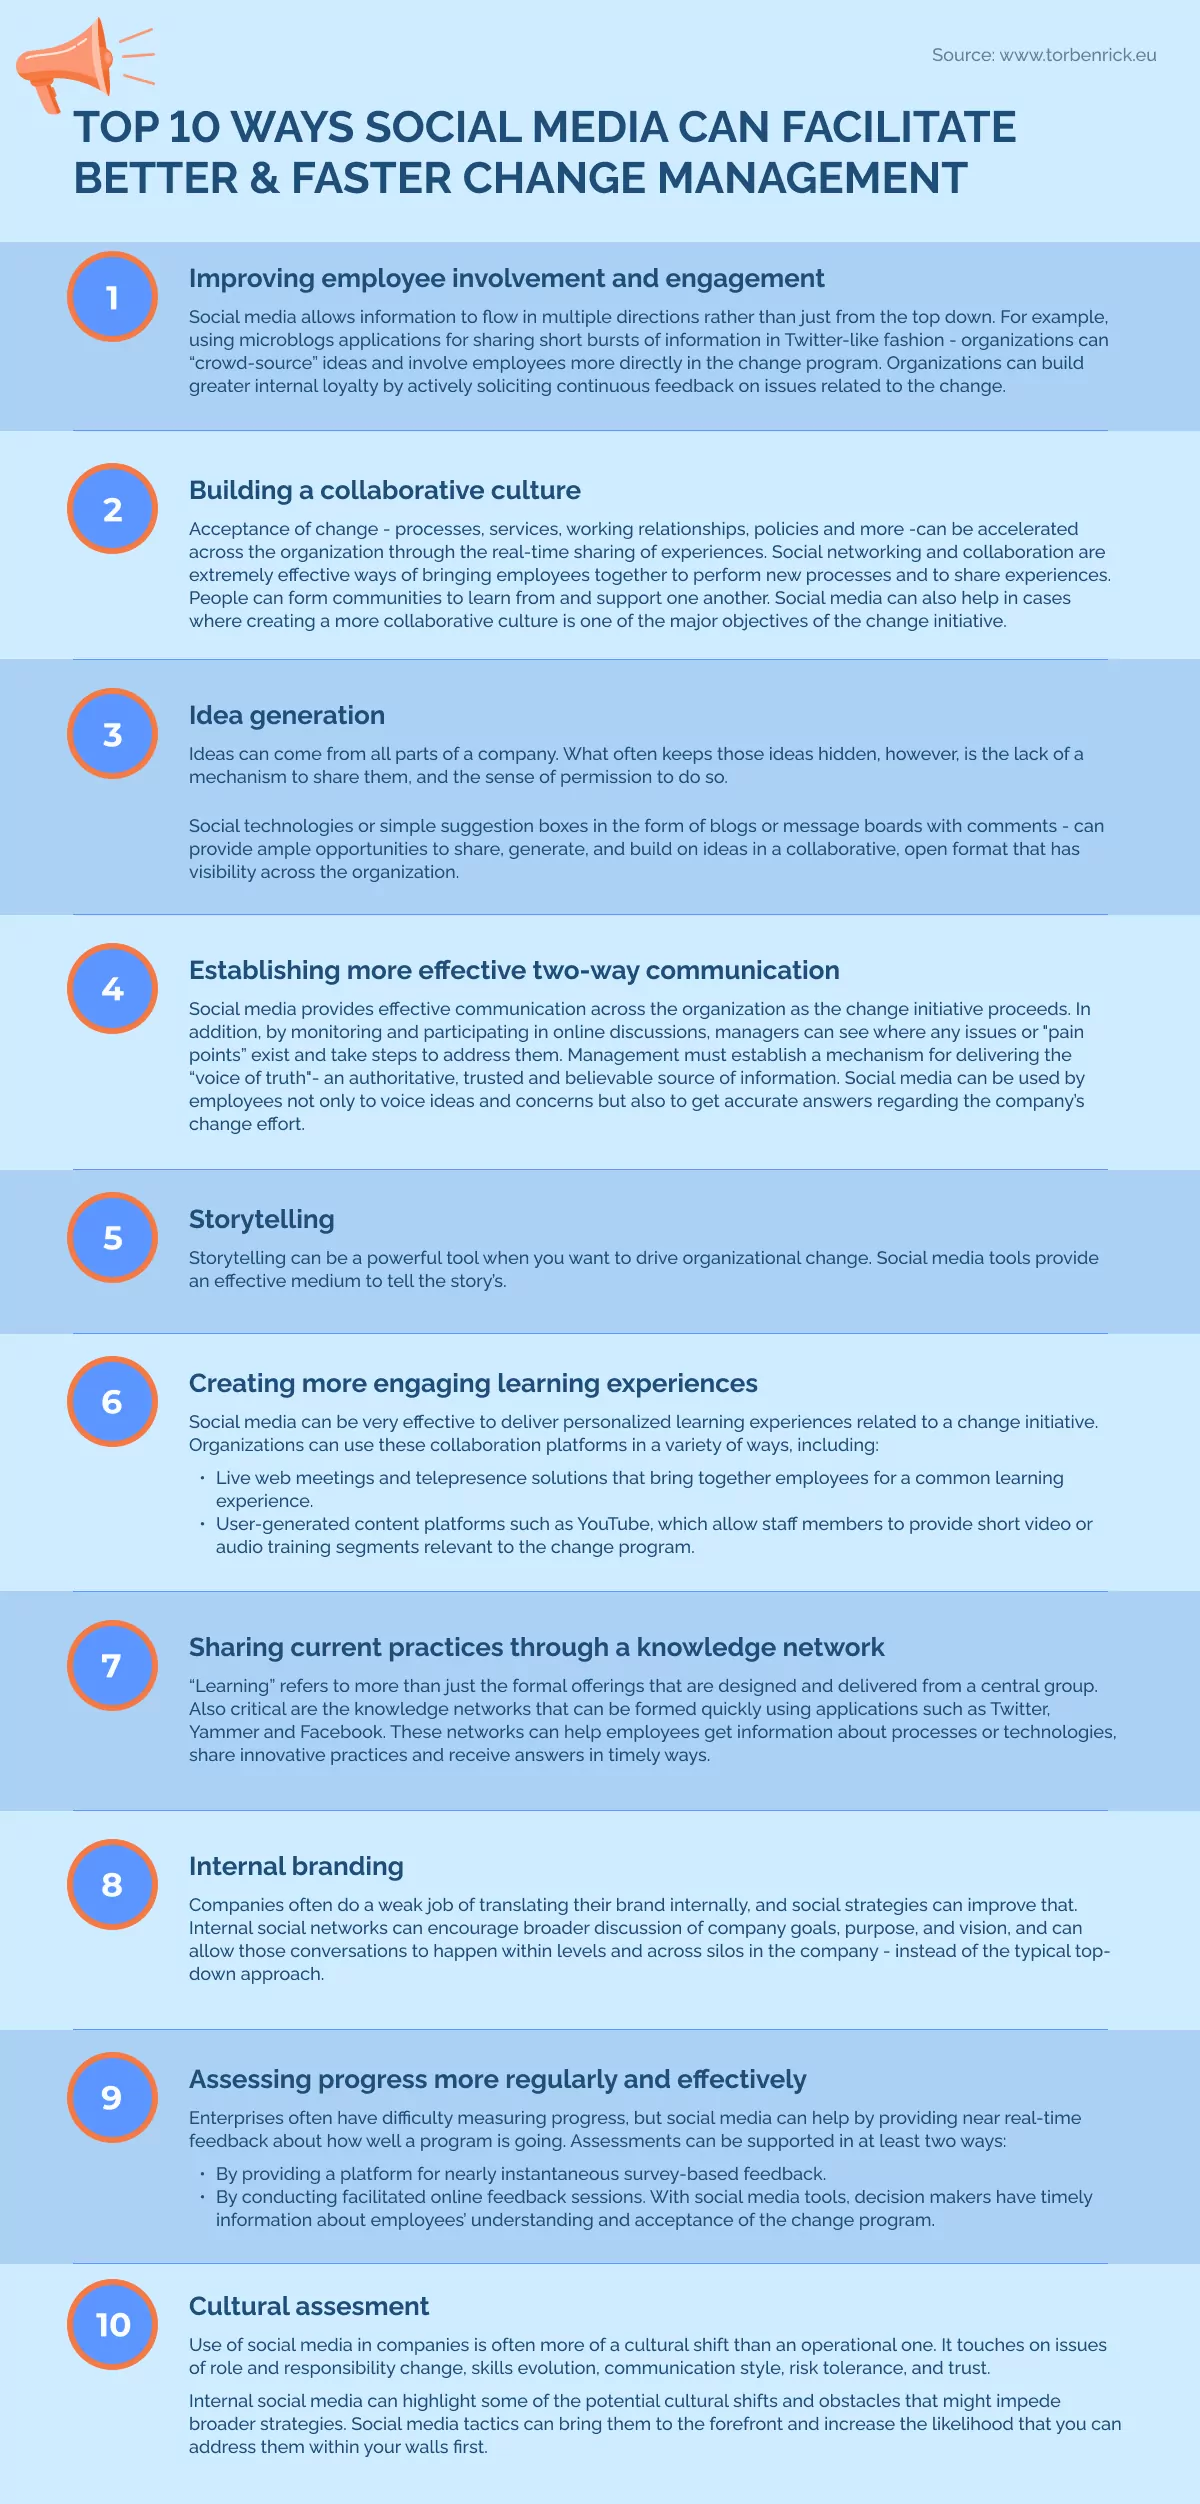 TOP 10 WAYS SOCIAL MEDIA CAN FACILITATE BETTER _ FASTER CHANGE MANAGEMENT